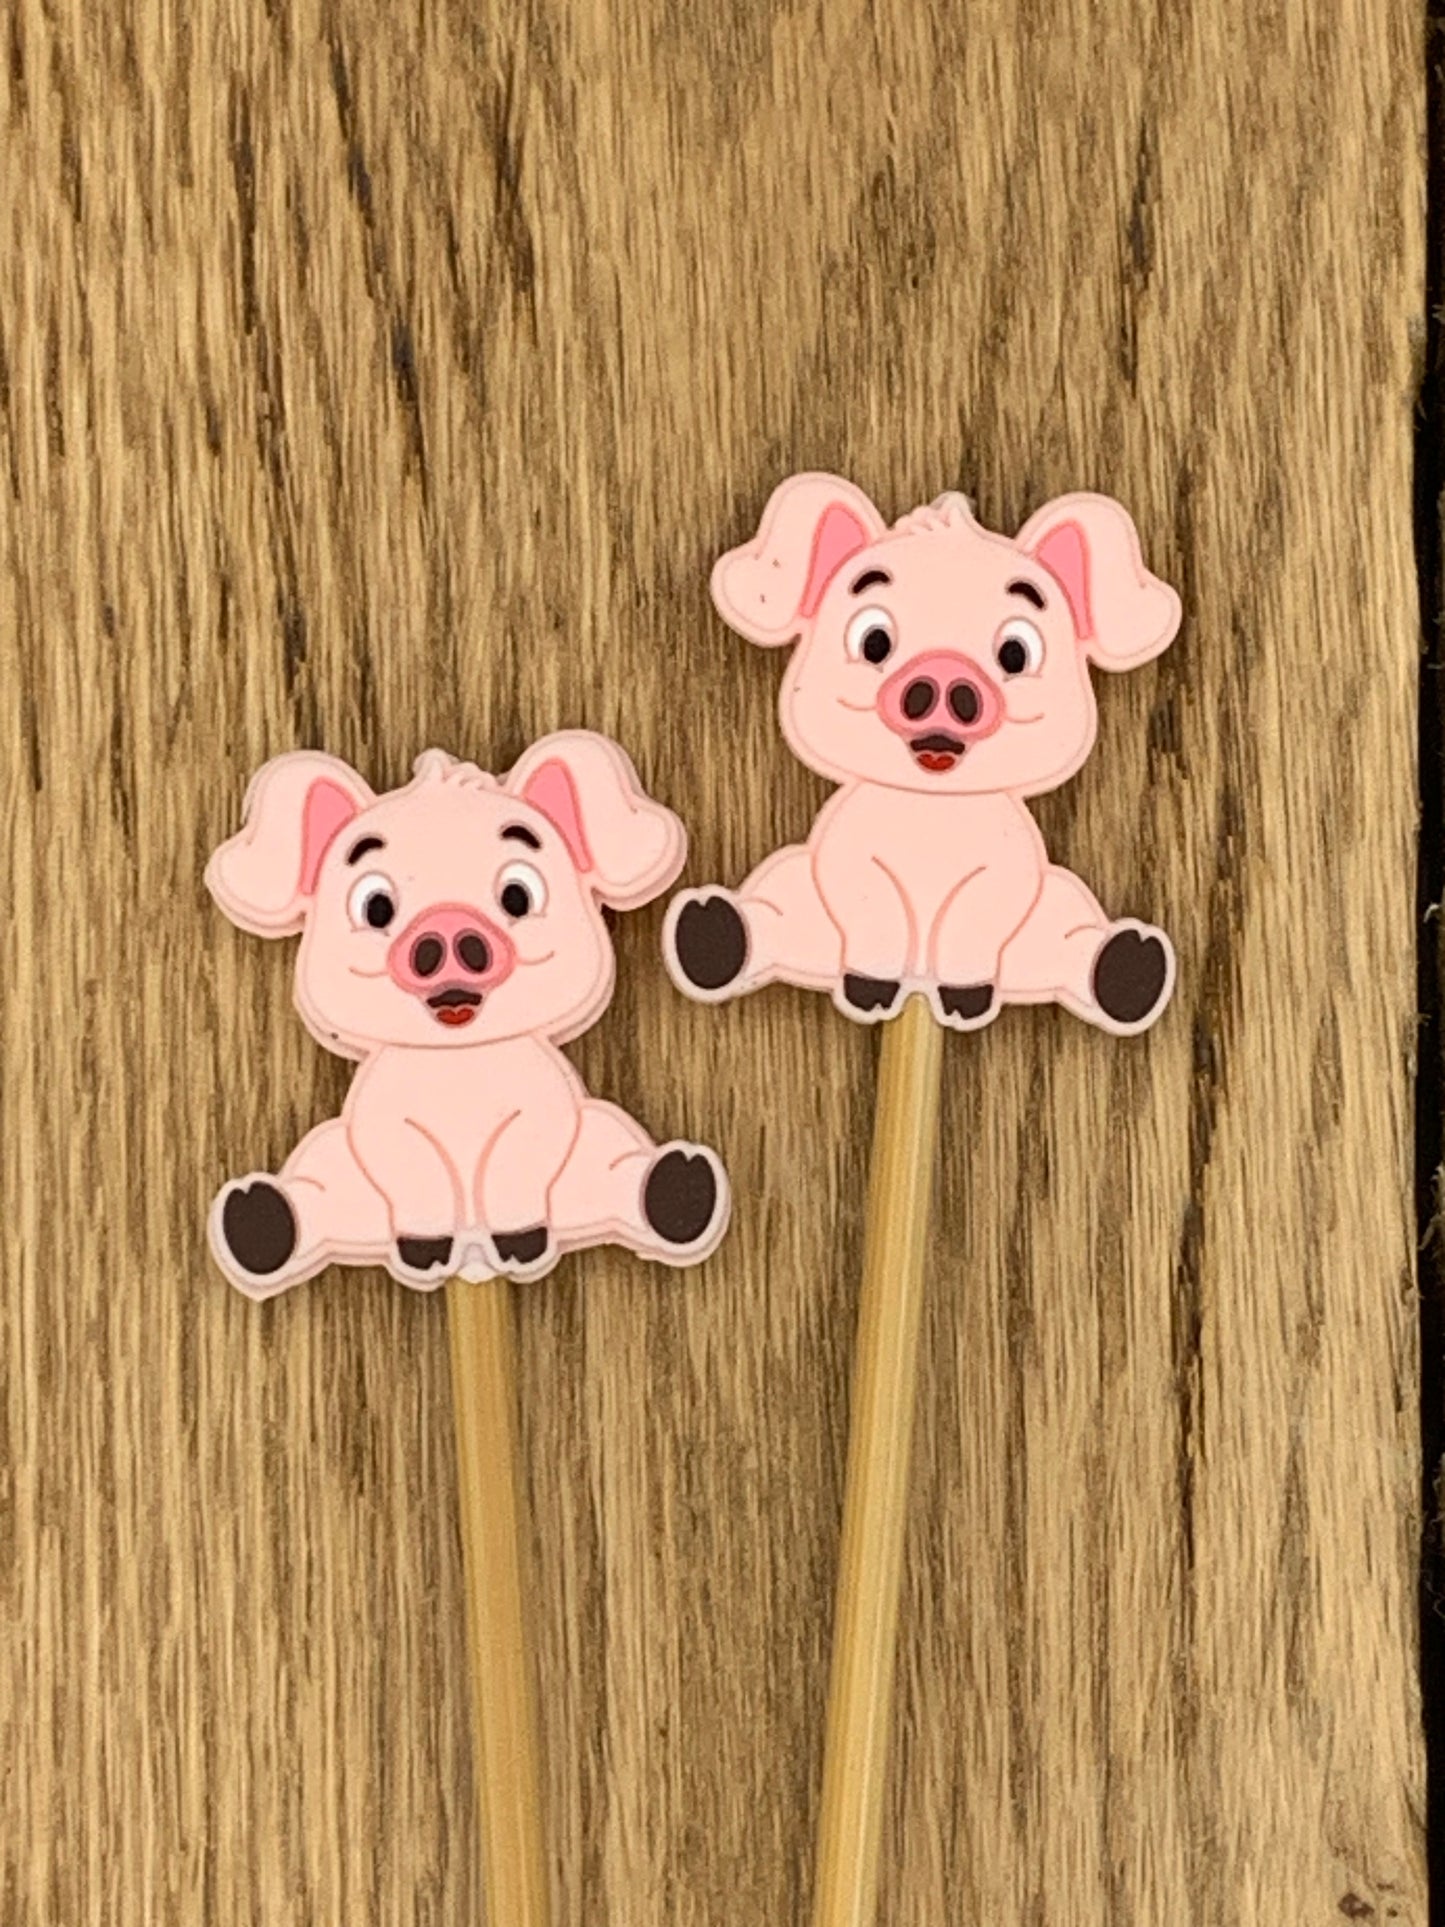 Pig - Stitch Stoppers